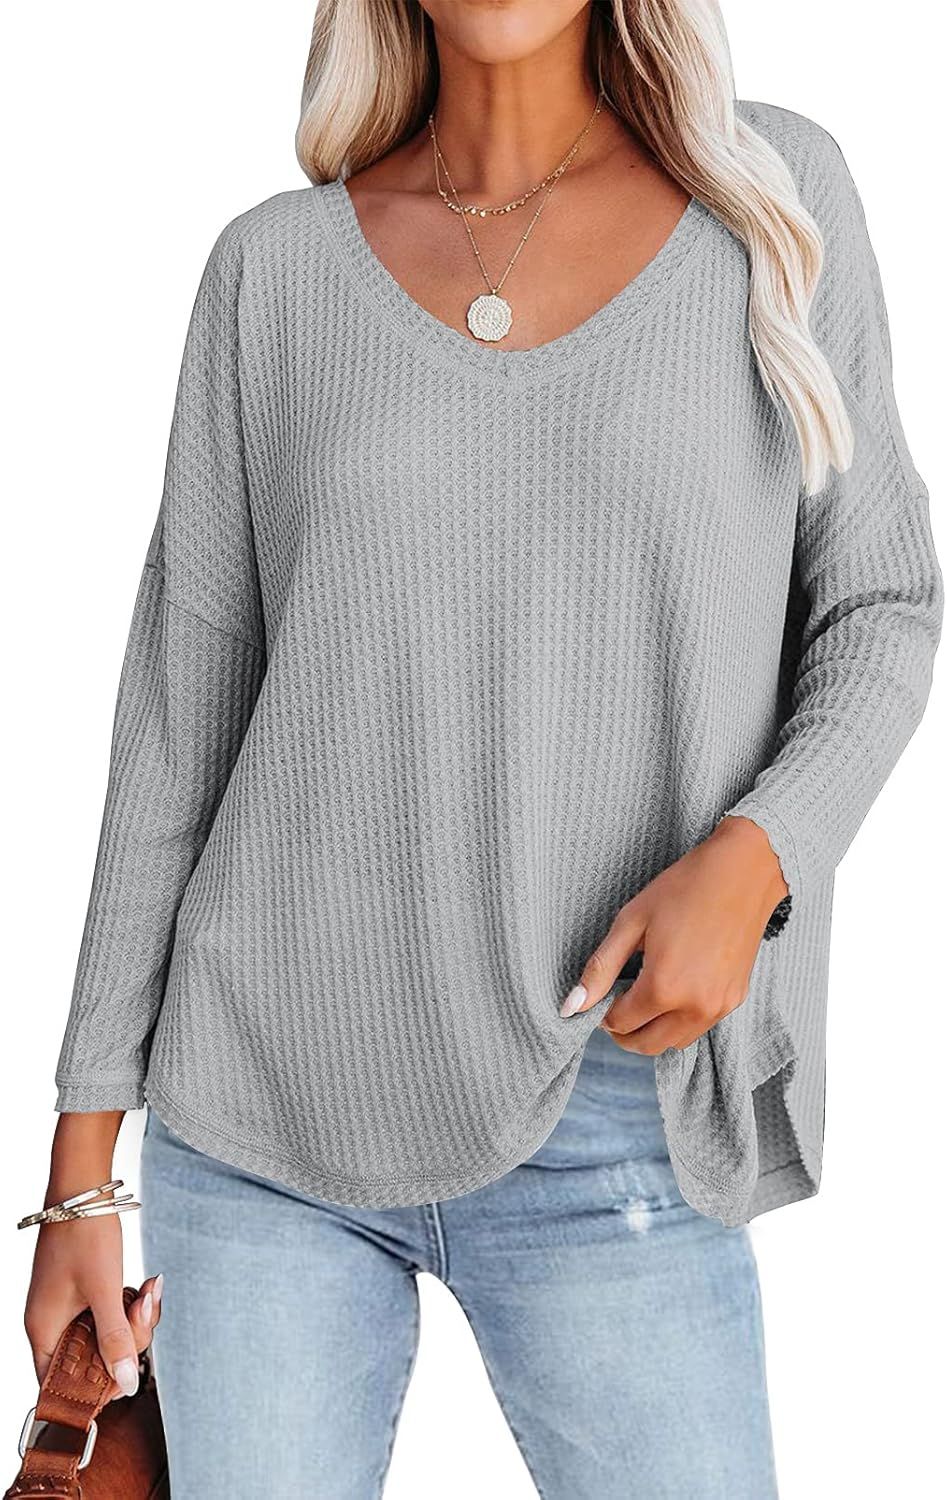 MEROKEETY Women's V Neck Batwing Sleeve Waffle Knit Tops Casual Loose Shirts Solid Color Blouse | Amazon (US)